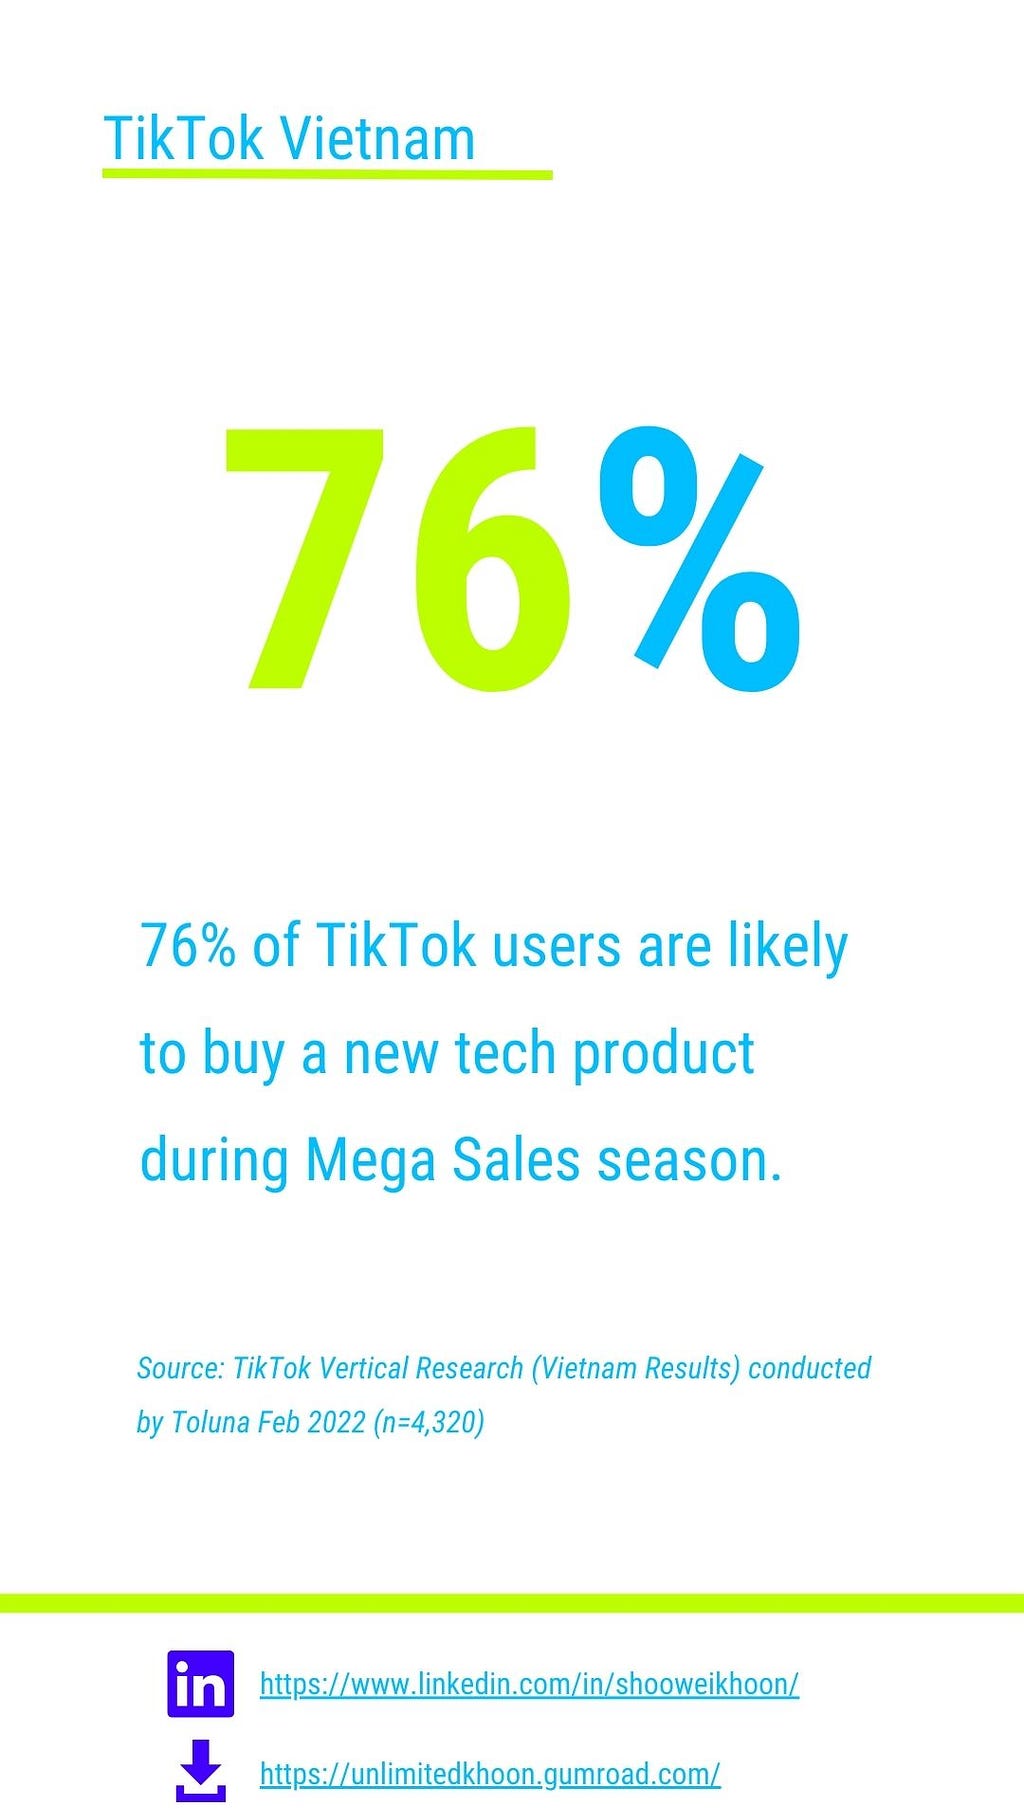 76% of VN TikTok users are likely to buy a new tech product during Mega Sales season.